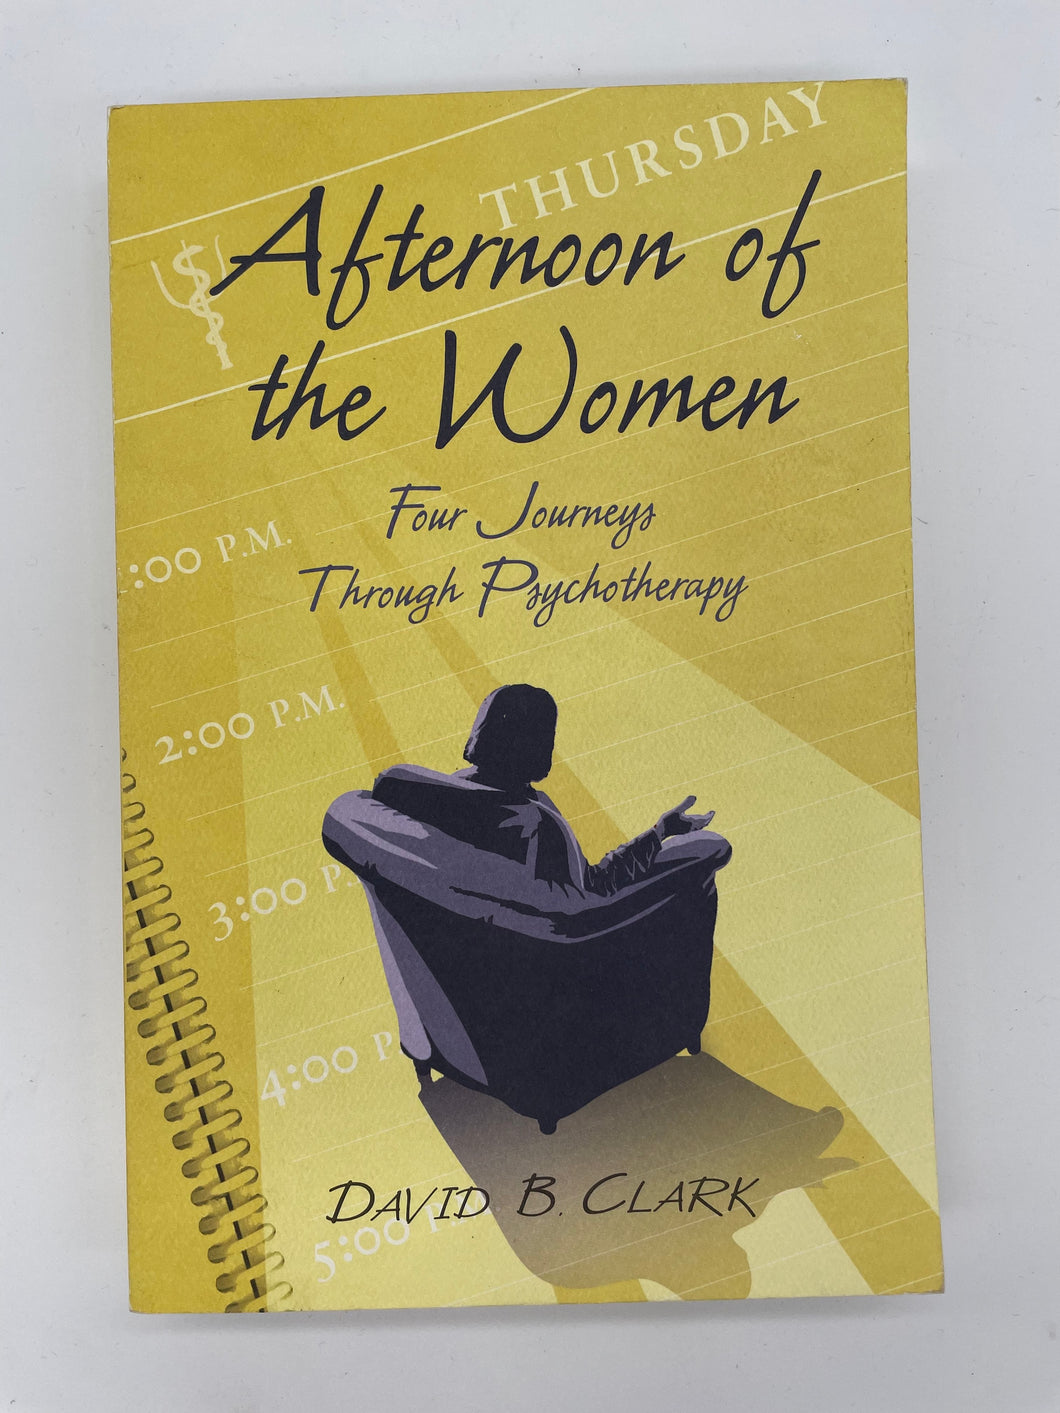 Afternoon of the Women: Four Journeys Through Psychotherapy